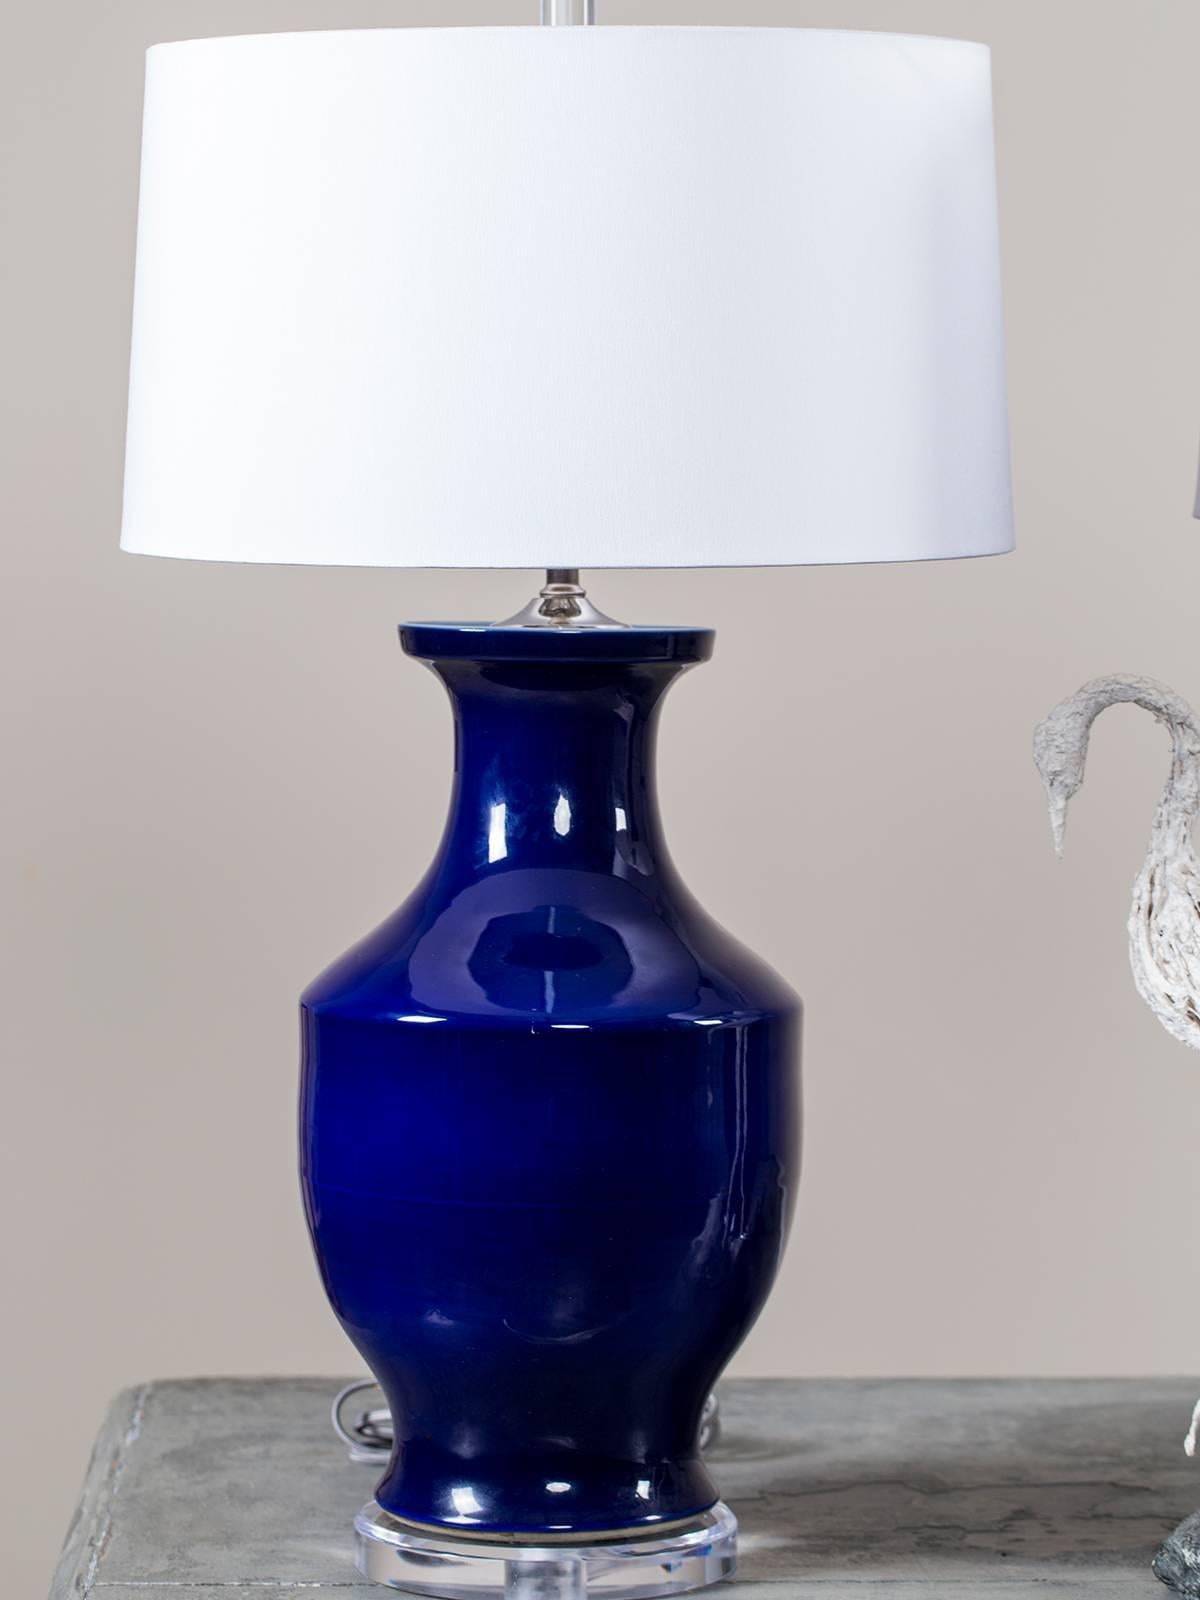 Chinese Export Pair of Vintage Cobalt Blue Chinese Vases, circa 1940 Mounted as Custom Lamps